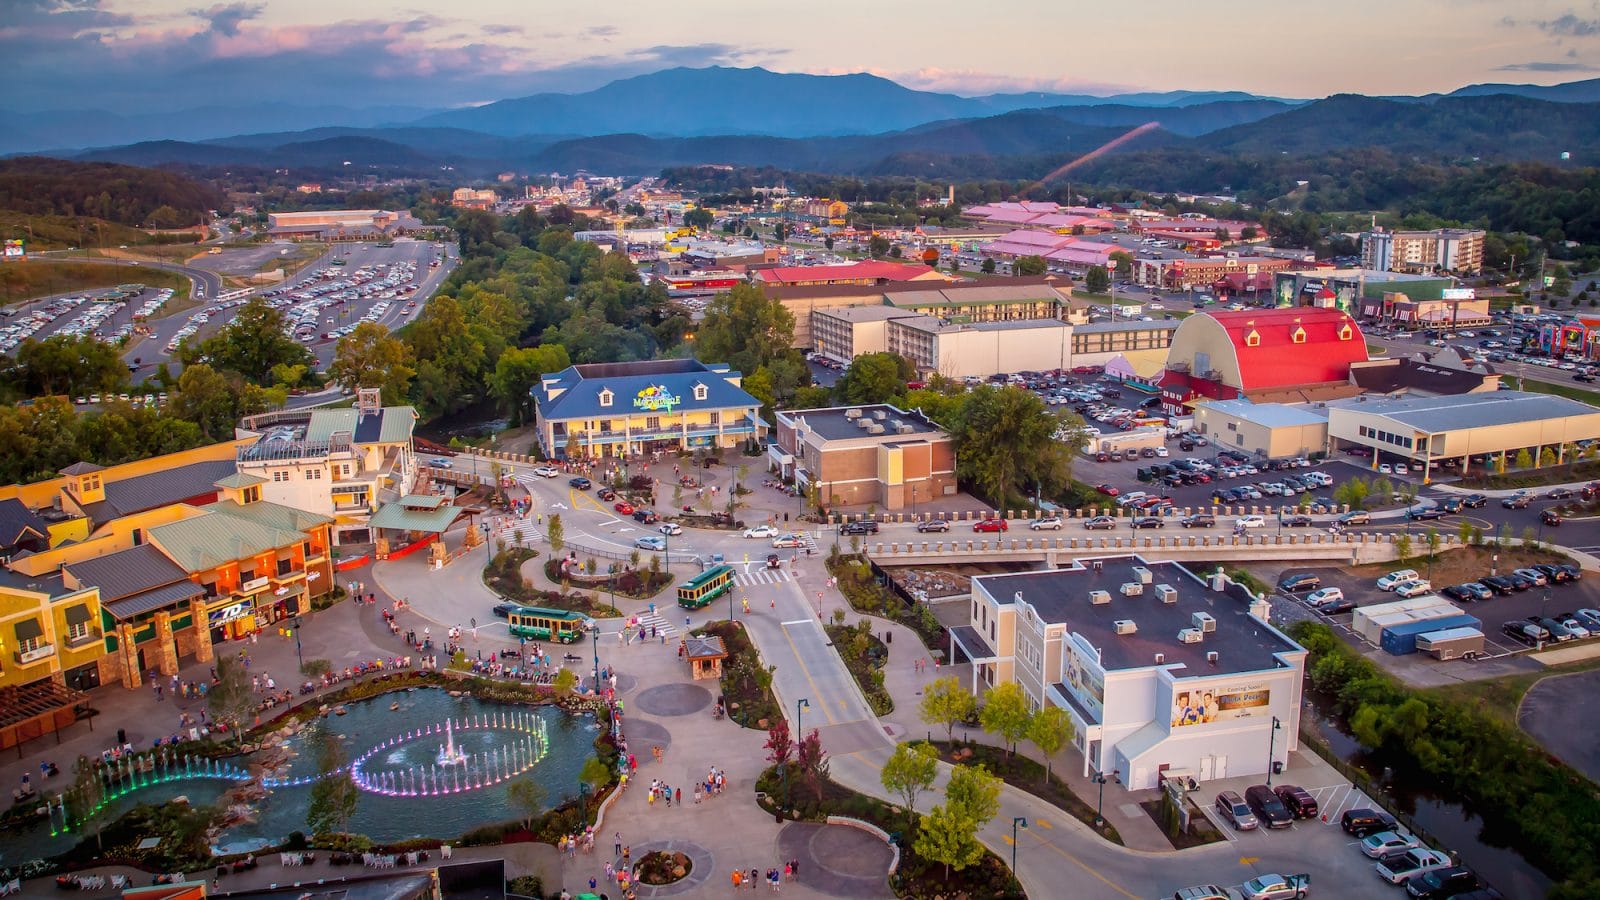 6 Things You Didn't Know About Pigeon Forge, TN